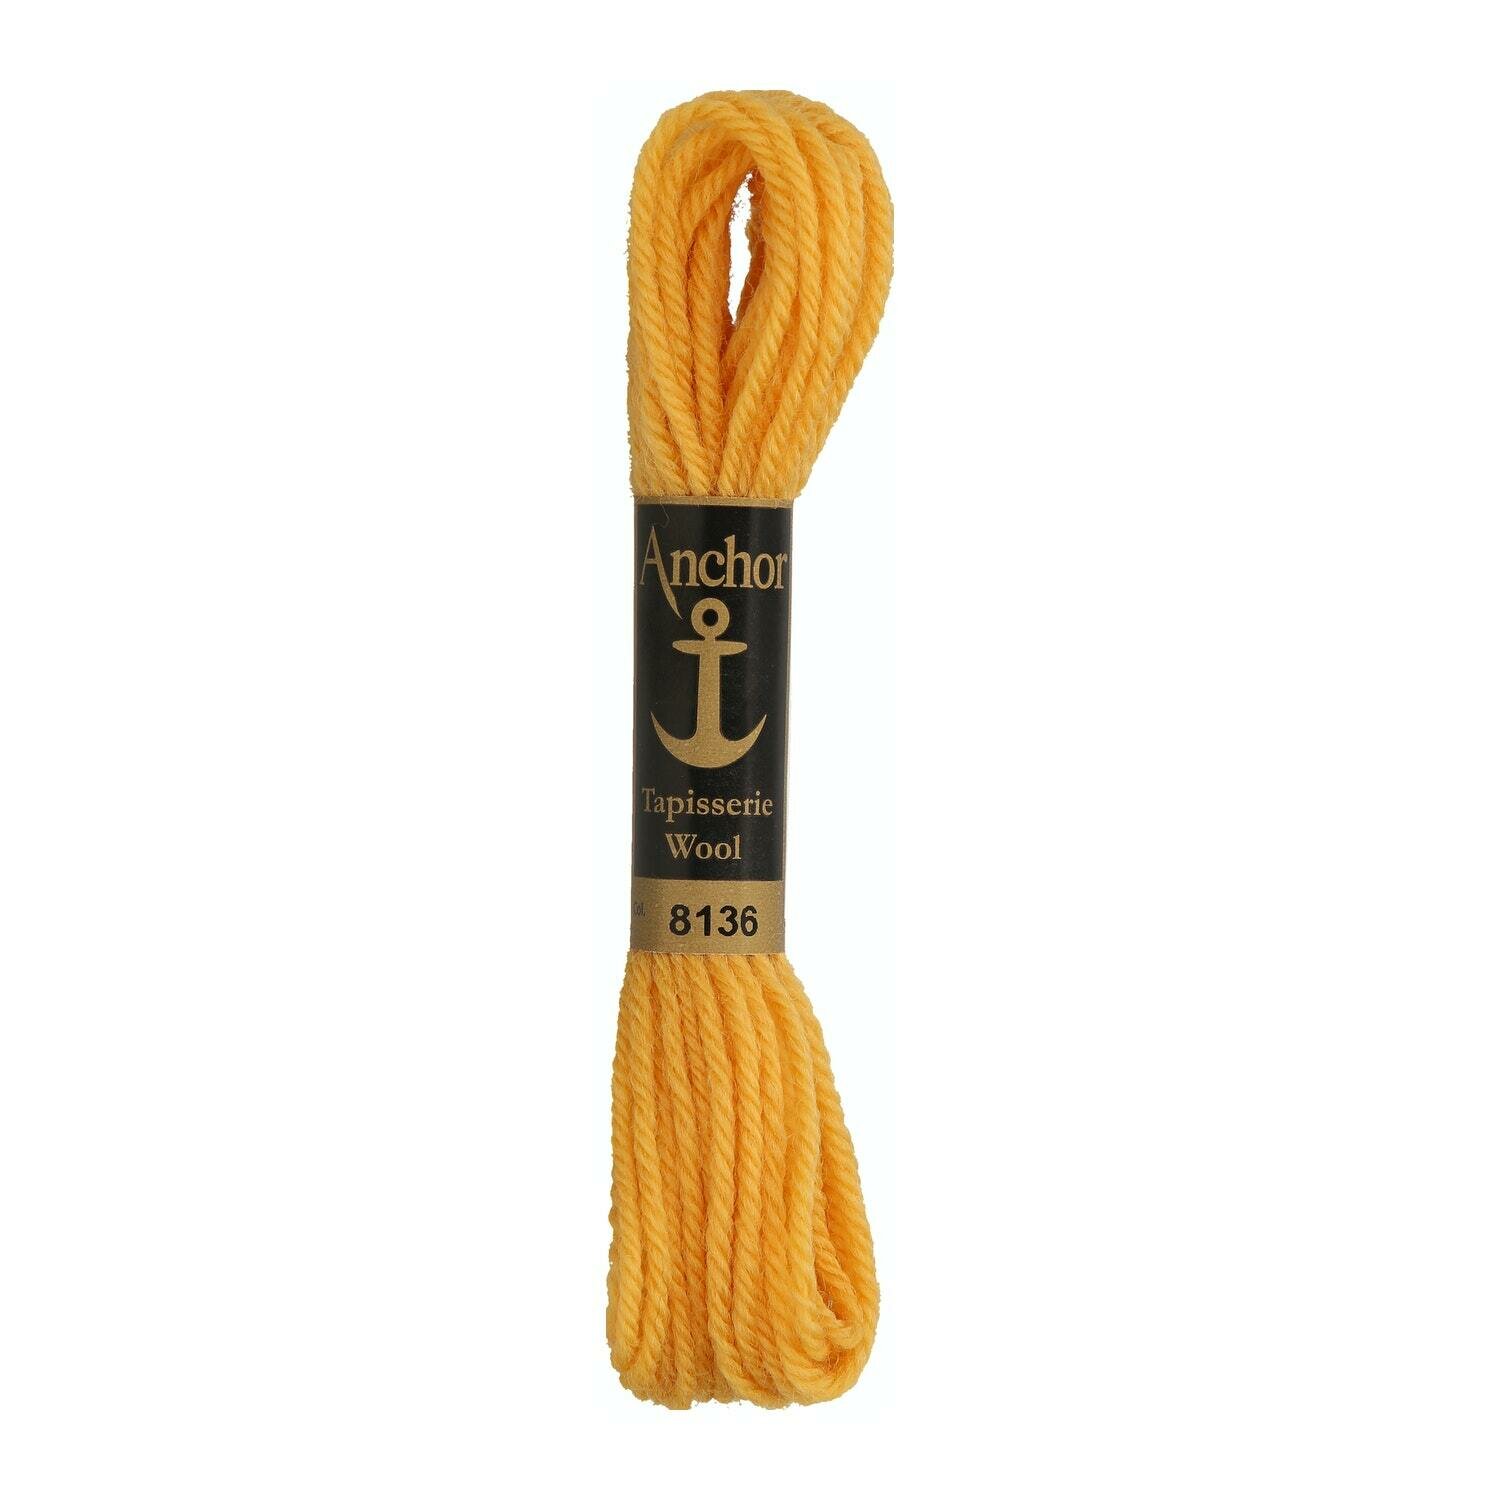 Anchor Tapisserie Wool #  08136